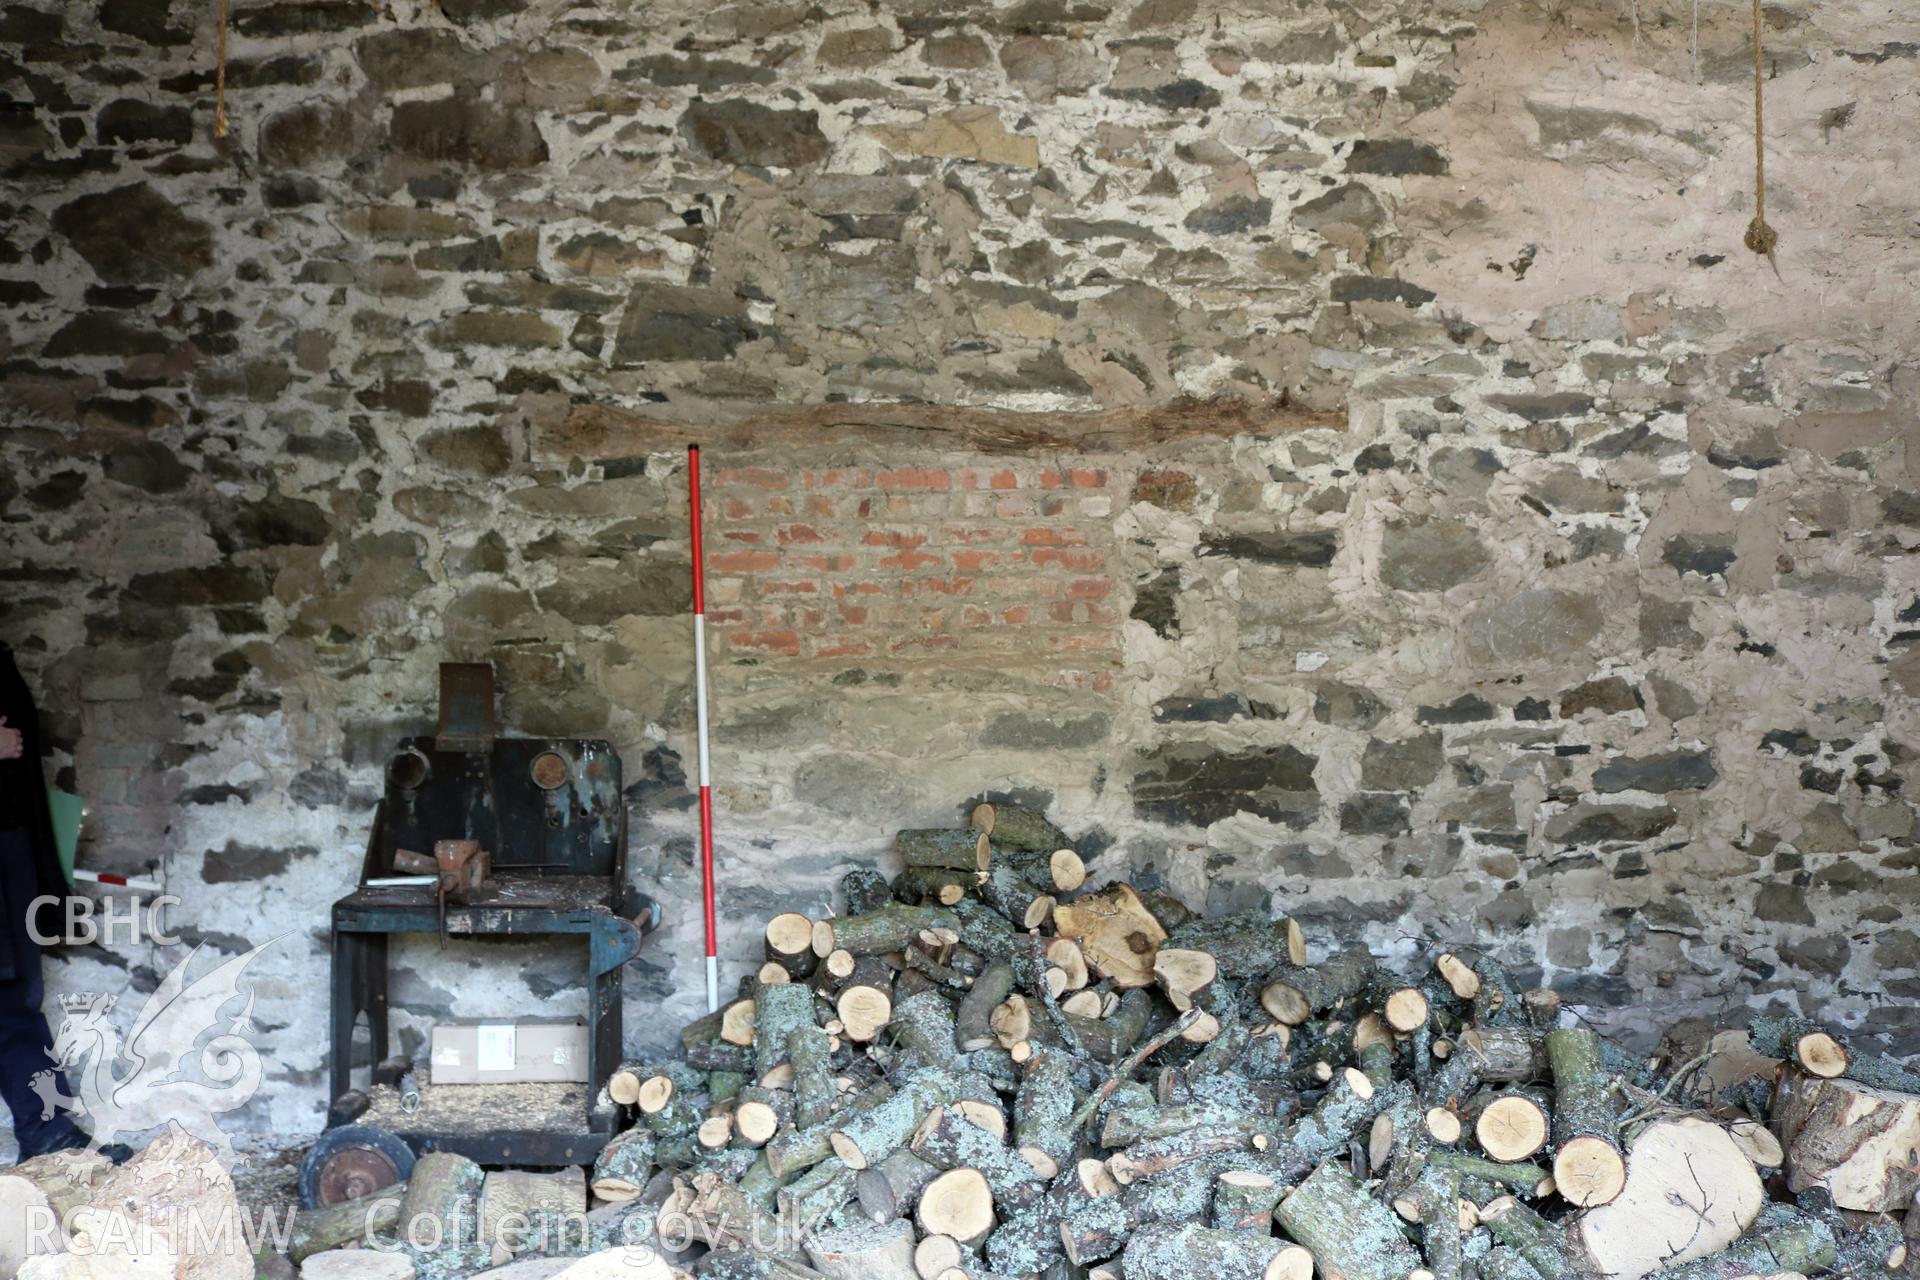 Photograph showing interior view of barn and cottage ground floor at Maes yr Hendre, taken by Dr Marian Gwyn, 6th July 2016. (Original Reference no. 0113)